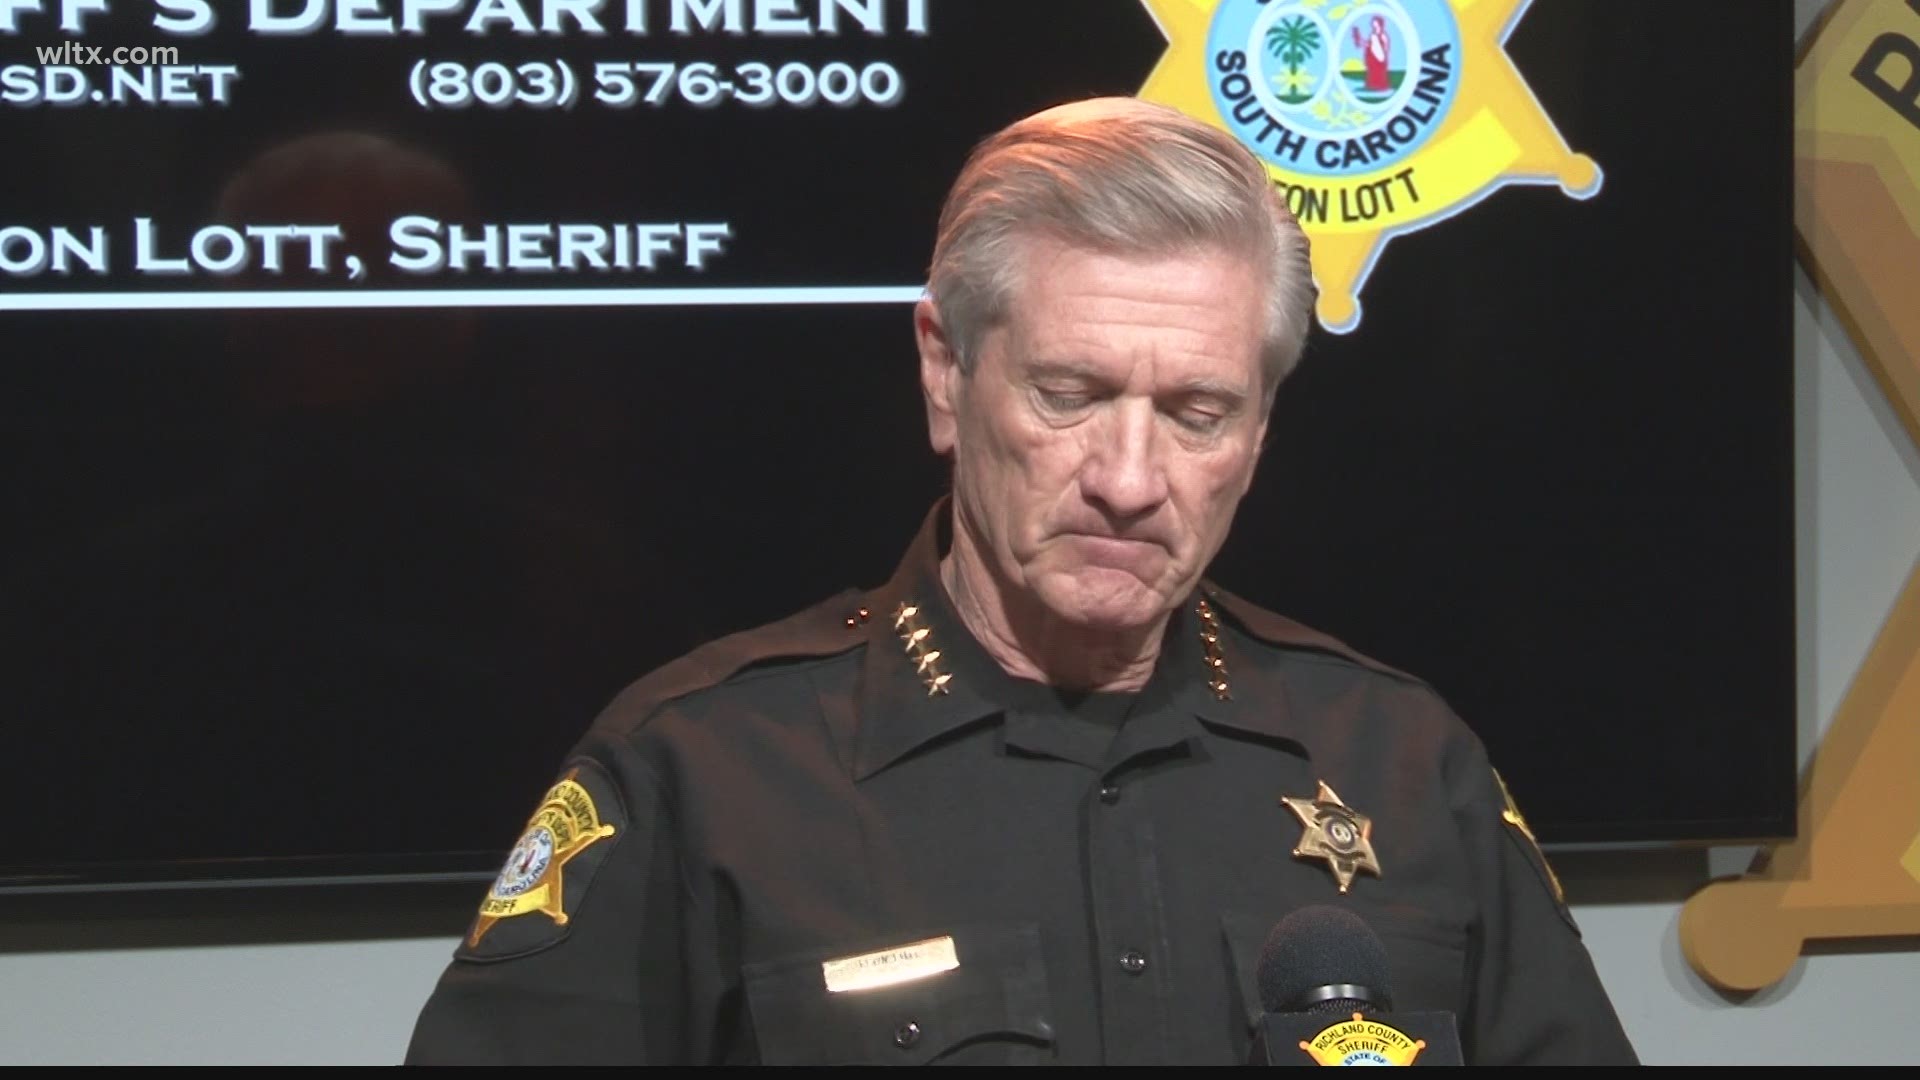 Sheriff Lott says parents need to provide guidance to their children and the community needs to come together to help curb gun violence across the Midlands.